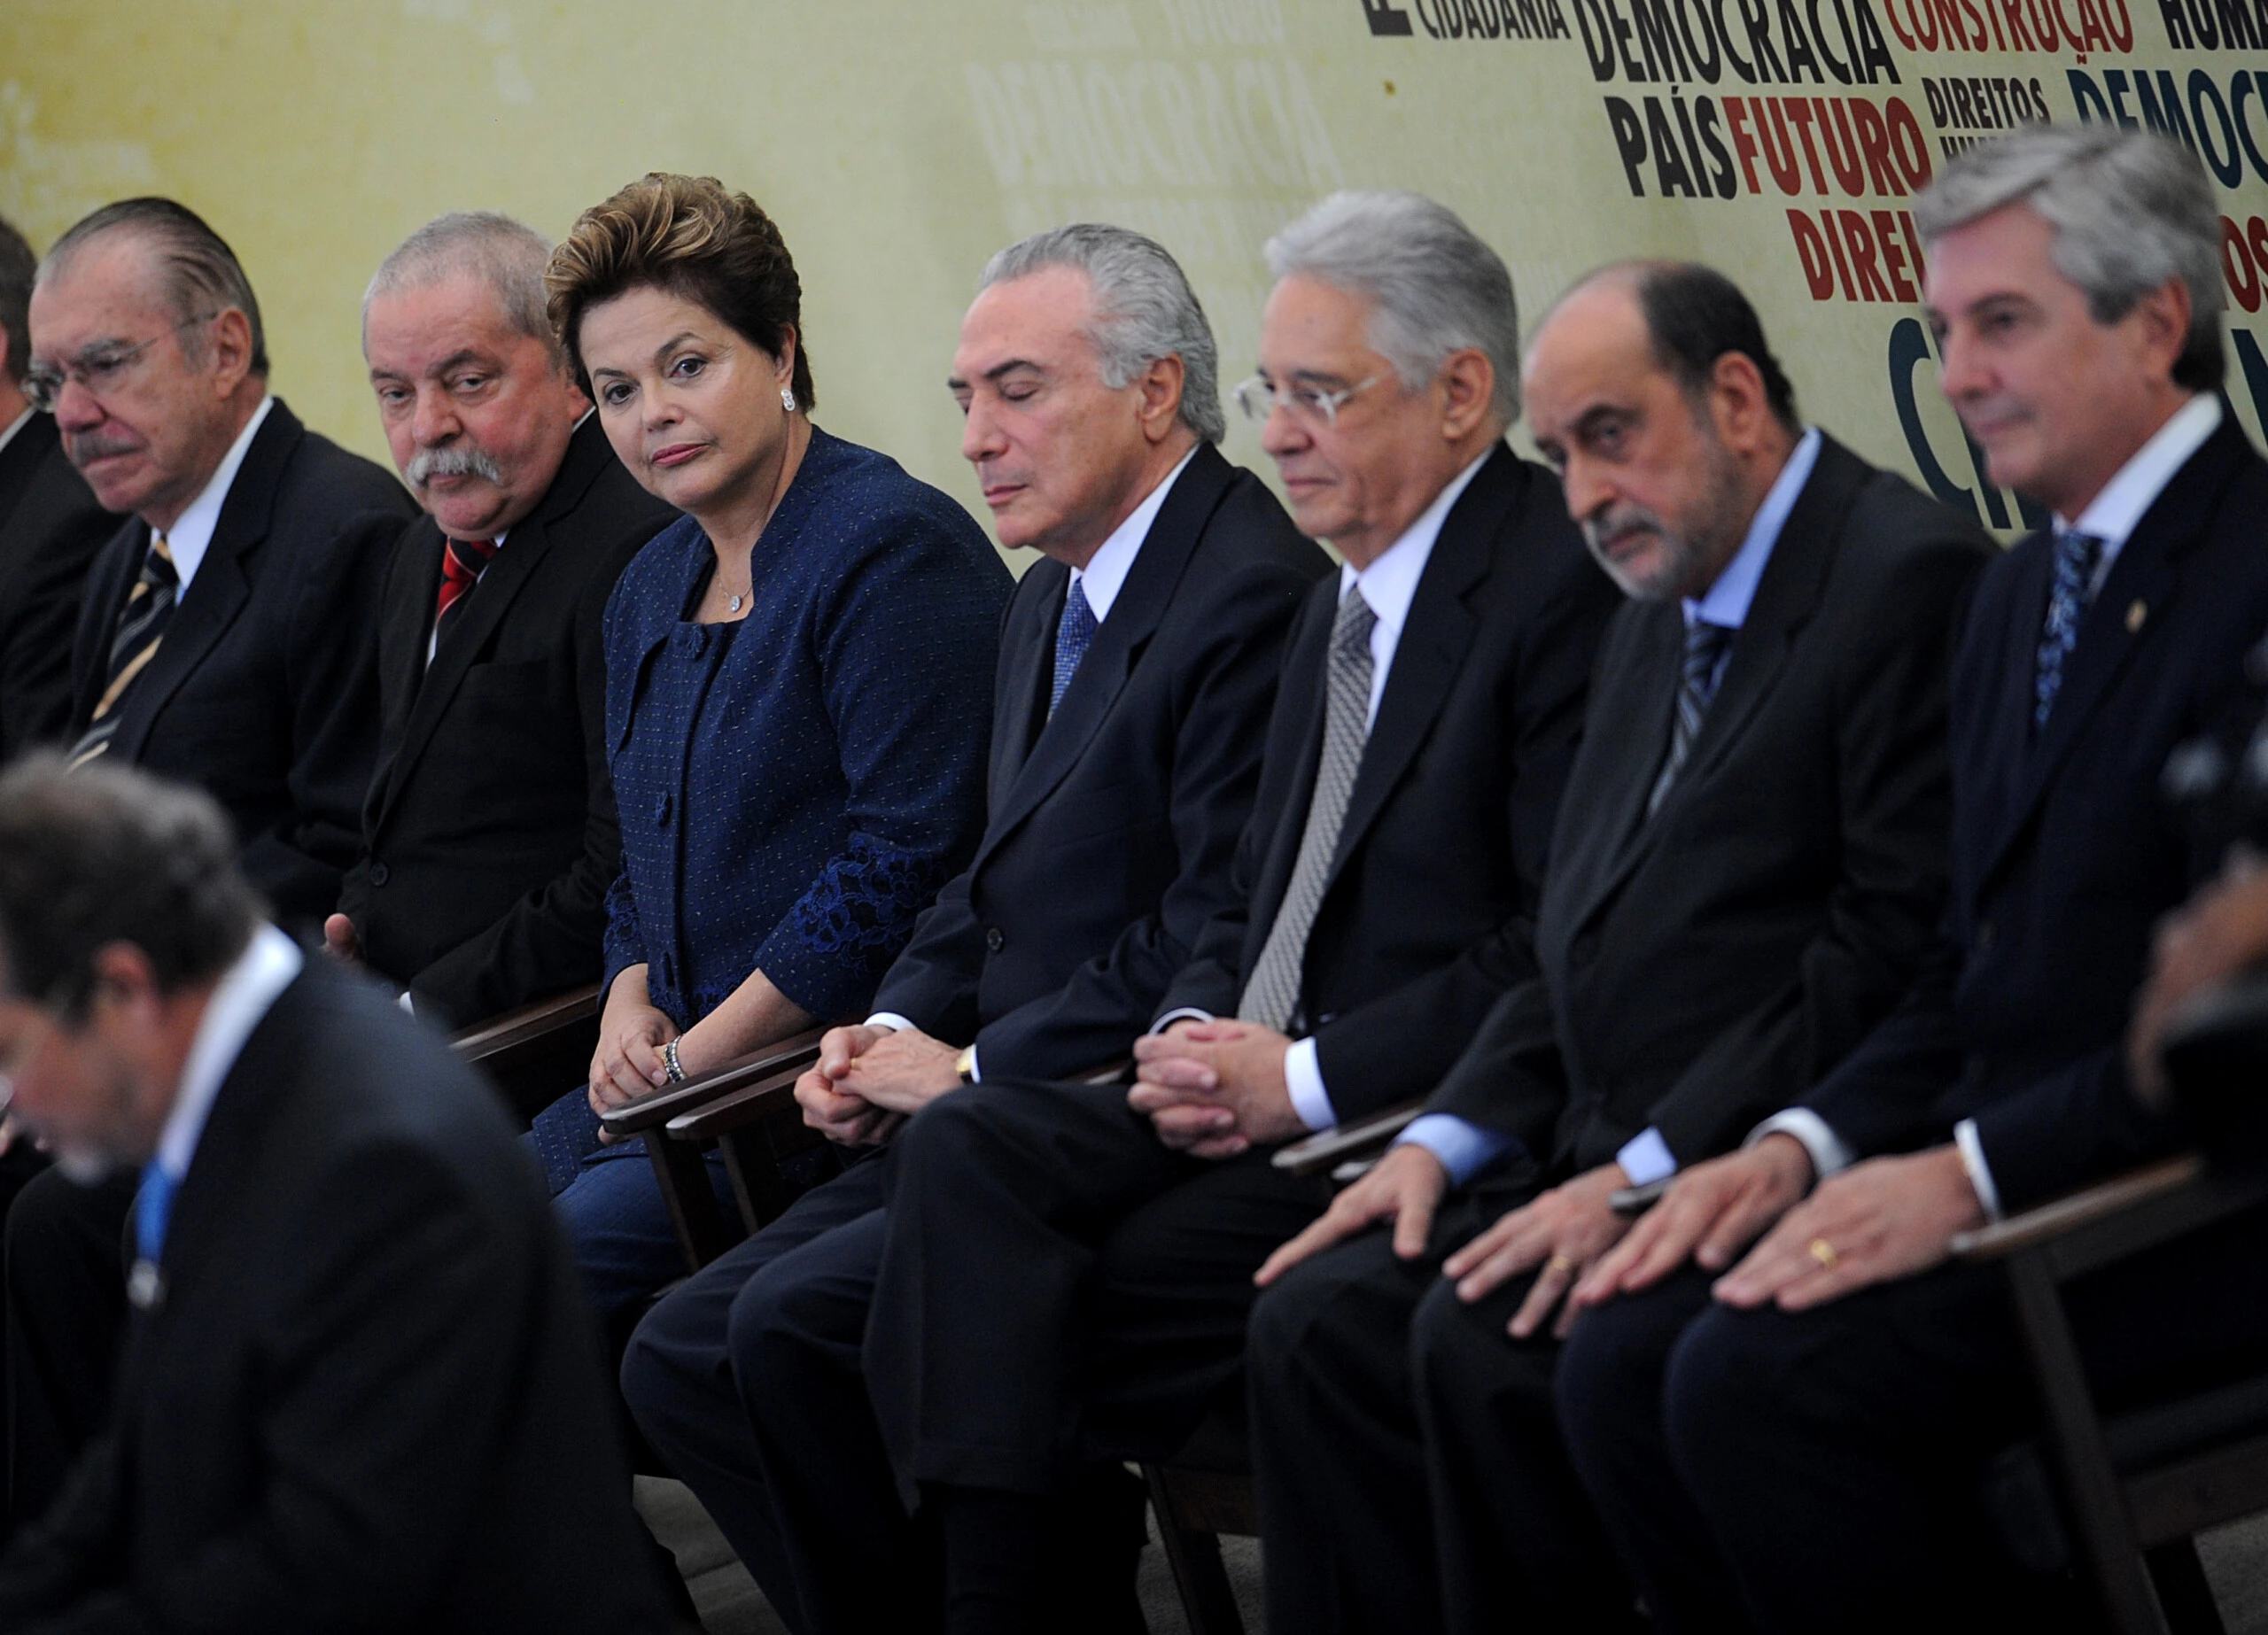 Brazilian President Dilma Rousseff (3-L) takes her seat during the inauguration ceremony of the National Commission of Truth that will investigate crimes and human rights violations committed during the Brazilian military dictatorship (1964-1984), at Planalto Palace, in Brasilia, on May 16, 2012. Also attending the ceremony Brazilian former presidents Jose Sarney (L), Luiz Inacio Lula da Silva (2-L), Fernando Henrique Cardoso (3-R) and Fernando Collor (R), and Vice-President Michel Temer (C) and the coordinator of the Commission Gilson Dipp (2-R).  AFP PHOTO/Pedro LADEIRA        (Photo credit should read PEDRO LADEIRA/AFP/GettyImages)